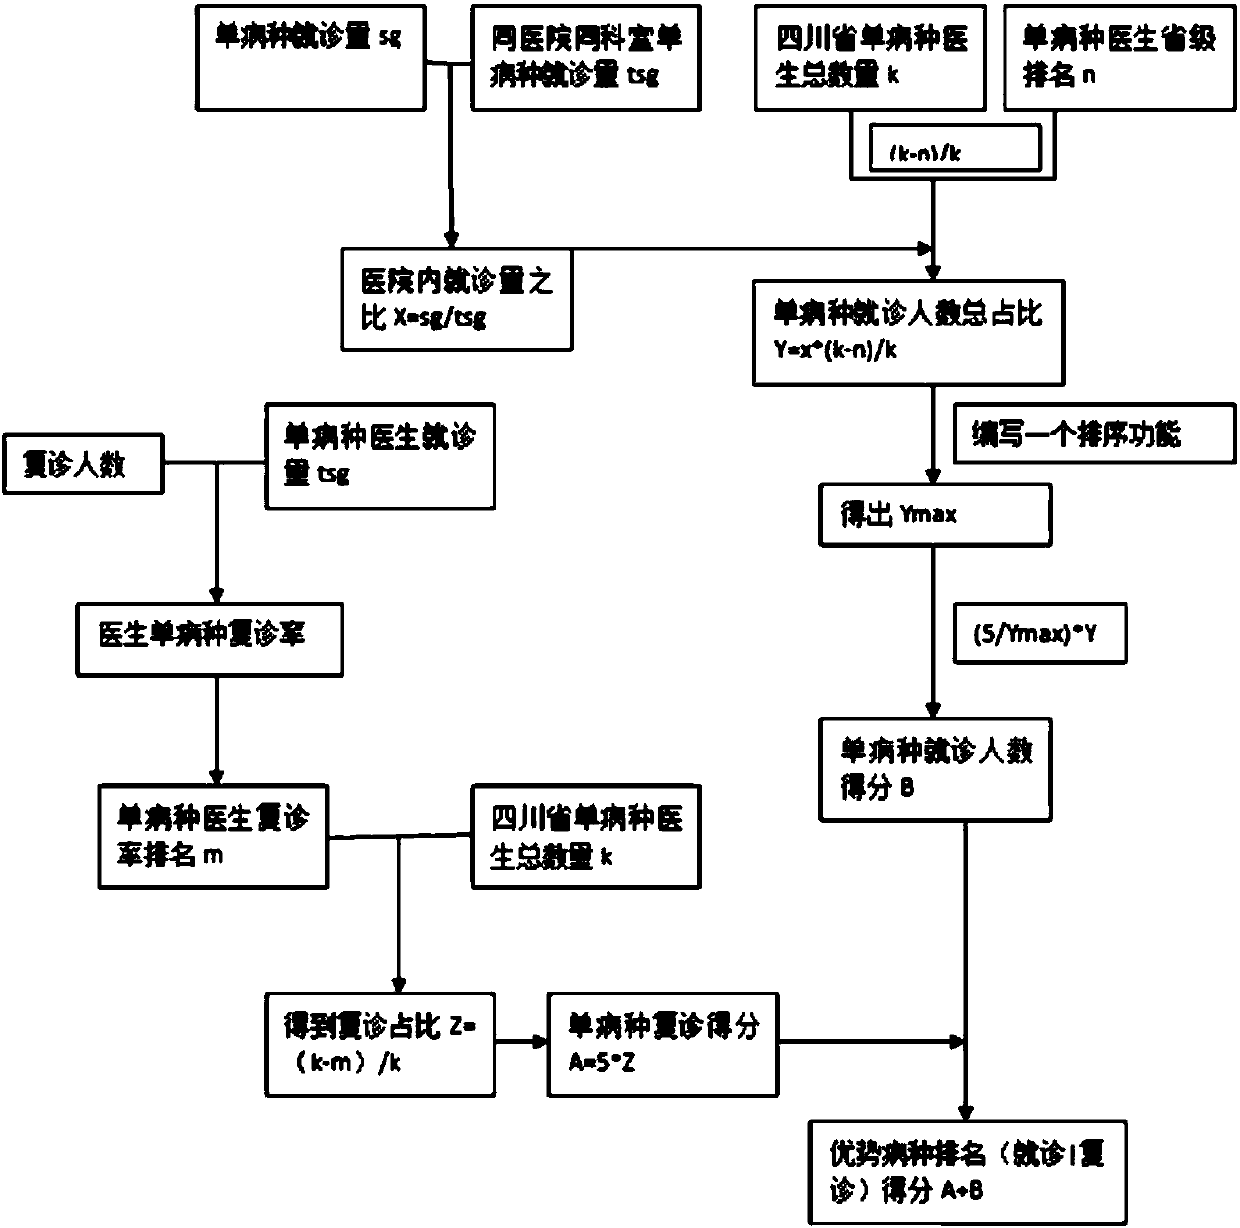 Clinical digital evaluation system of traditional Chinese medicine and its evaluation method based on big data analysis